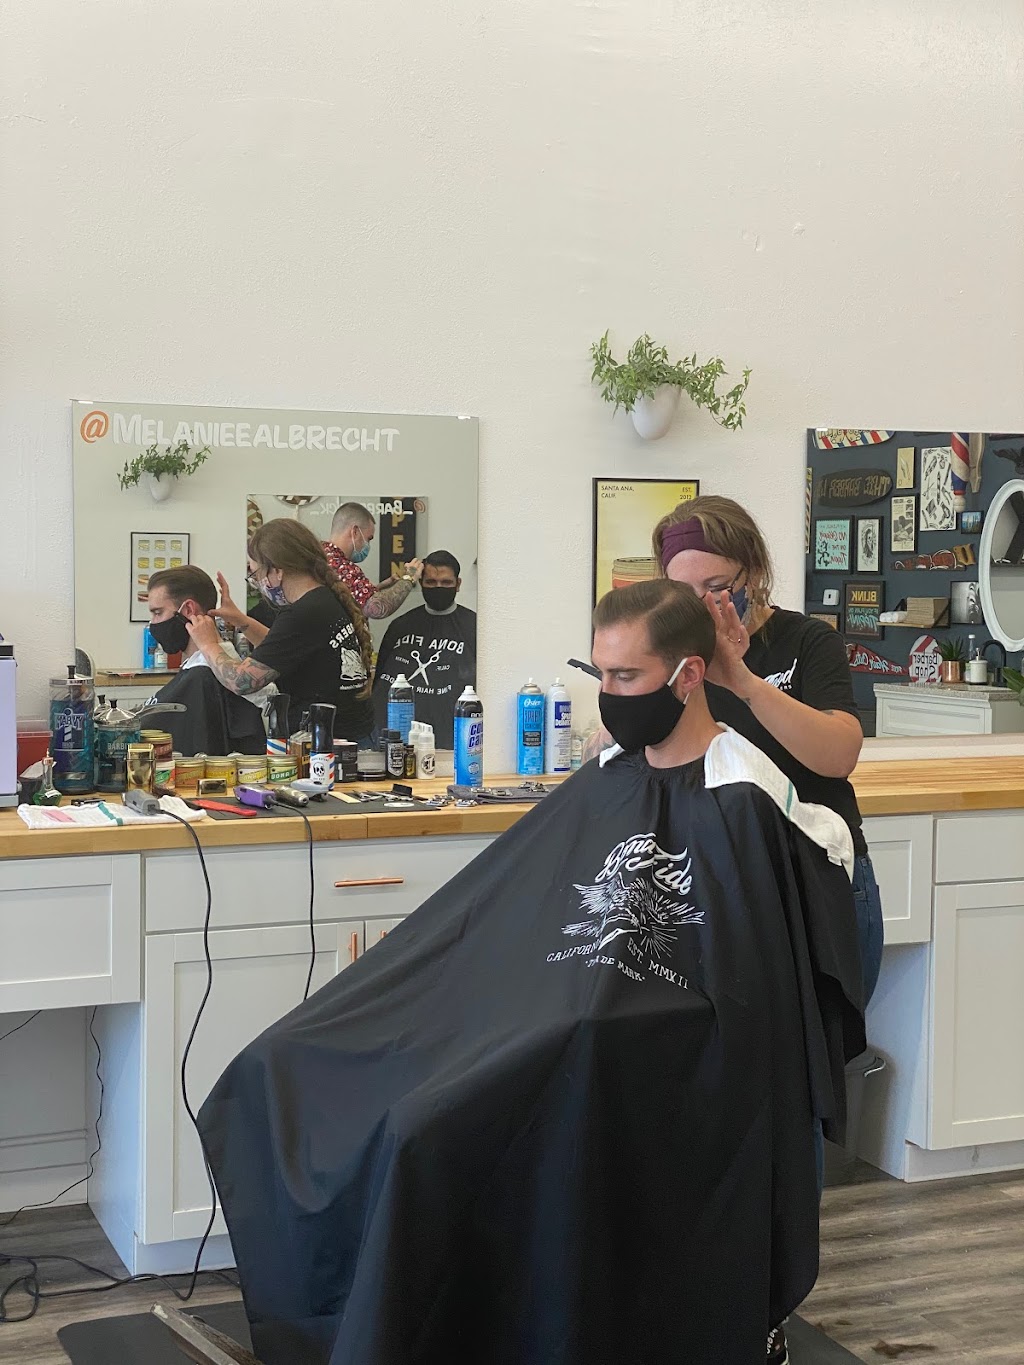 Good Barbers | 3046 Valmont Rd, Boulder, CO 80301, USA | Phone: (303) 632-6186